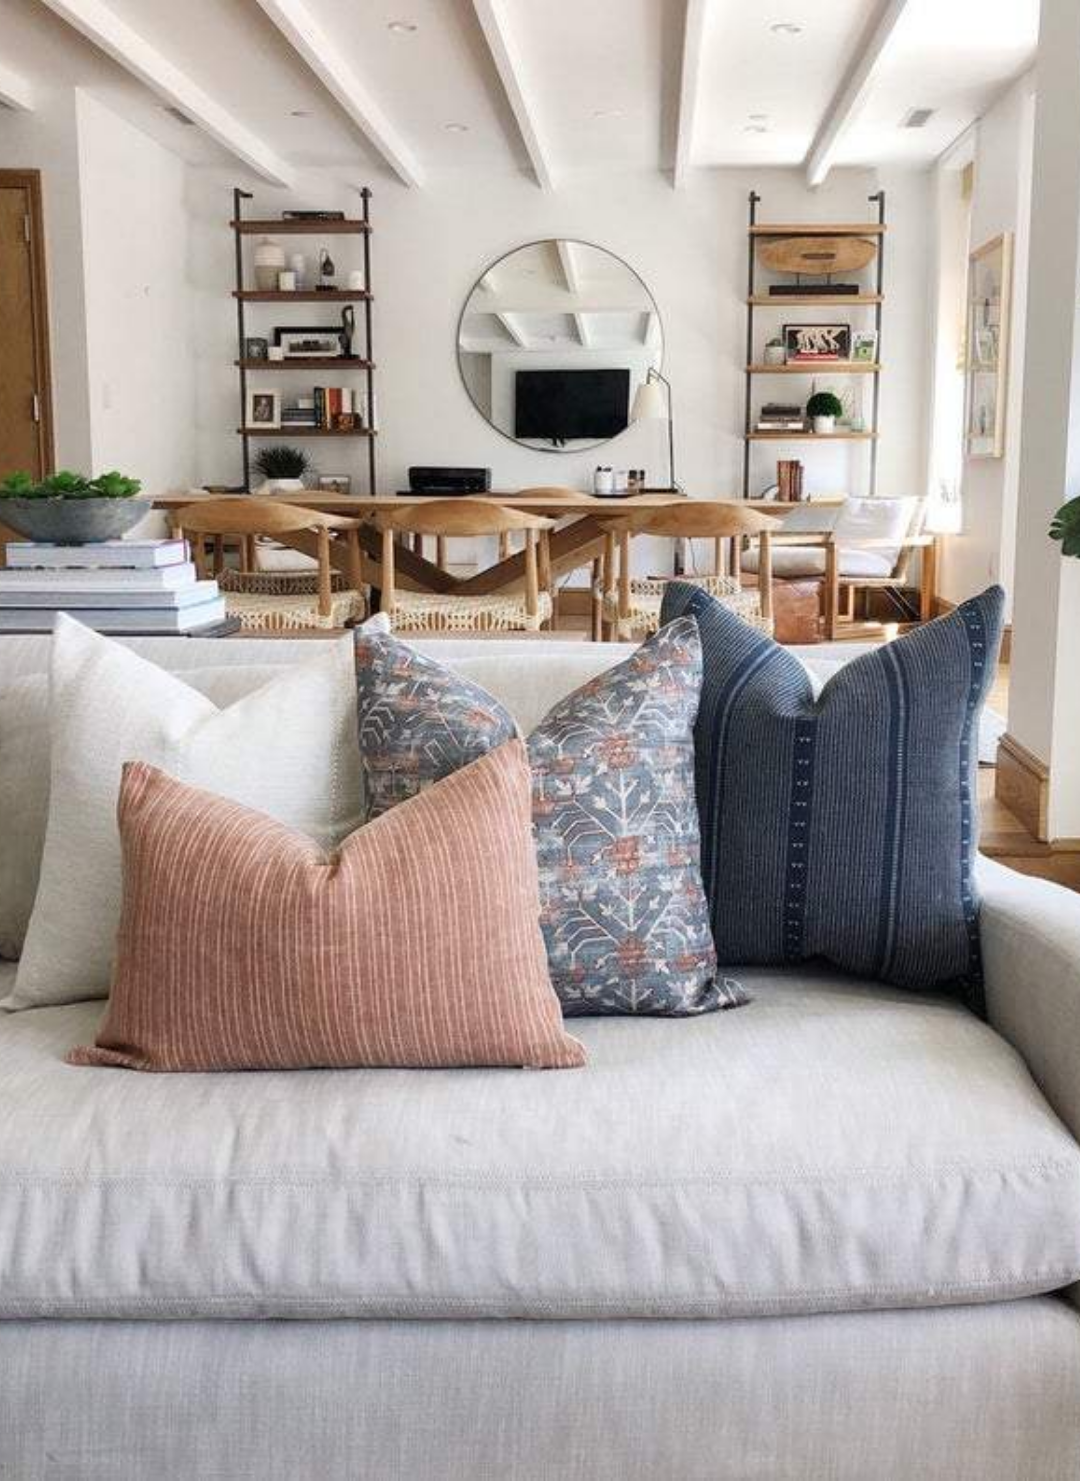 Styling ideas to go with my couches